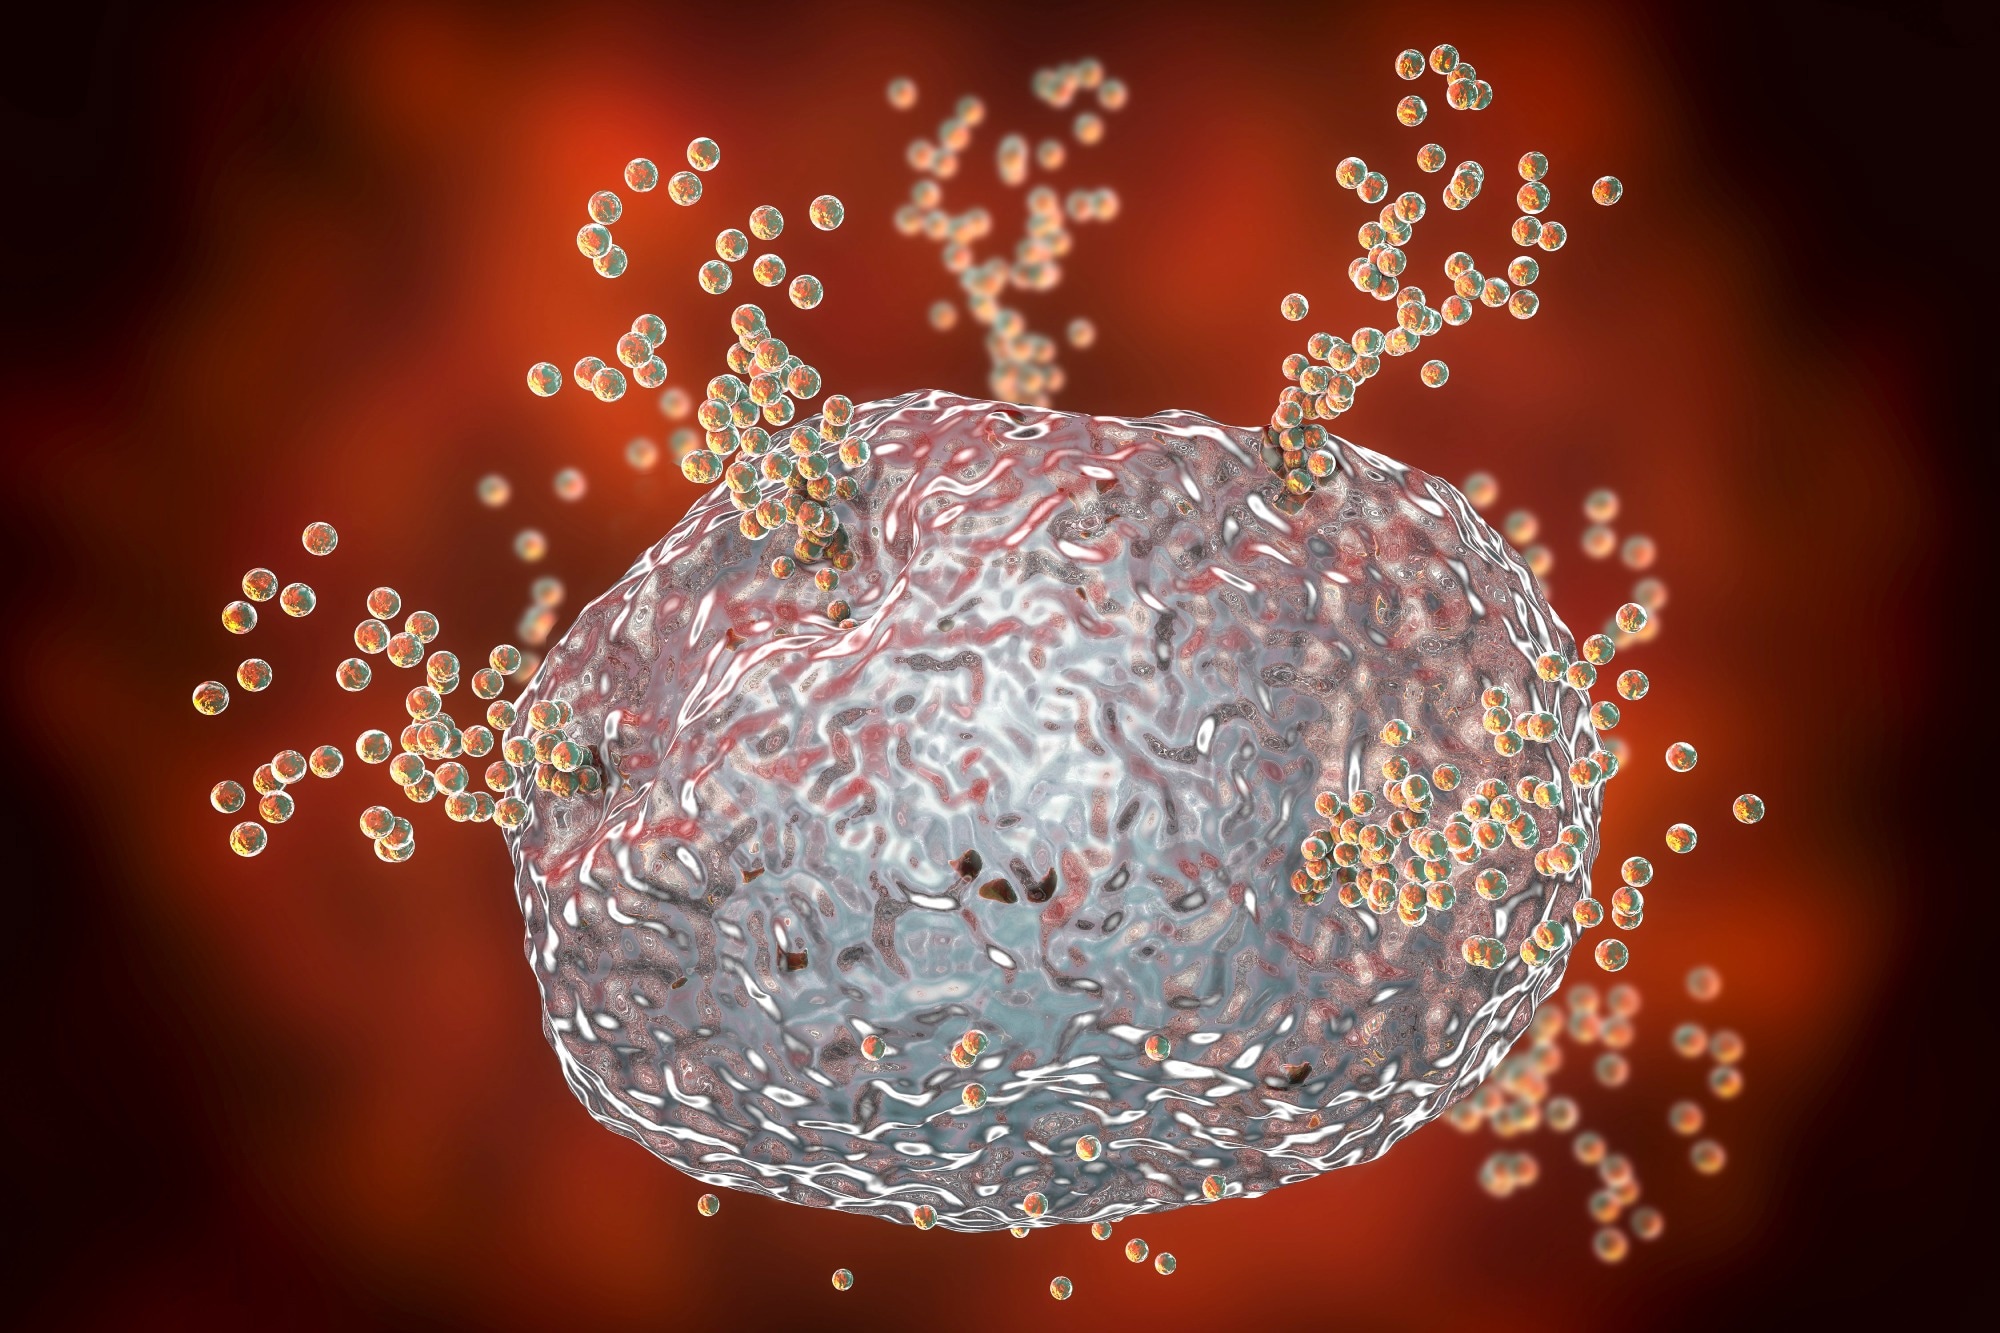 Mast cell releasing histamine during allergic response, 3D illustration